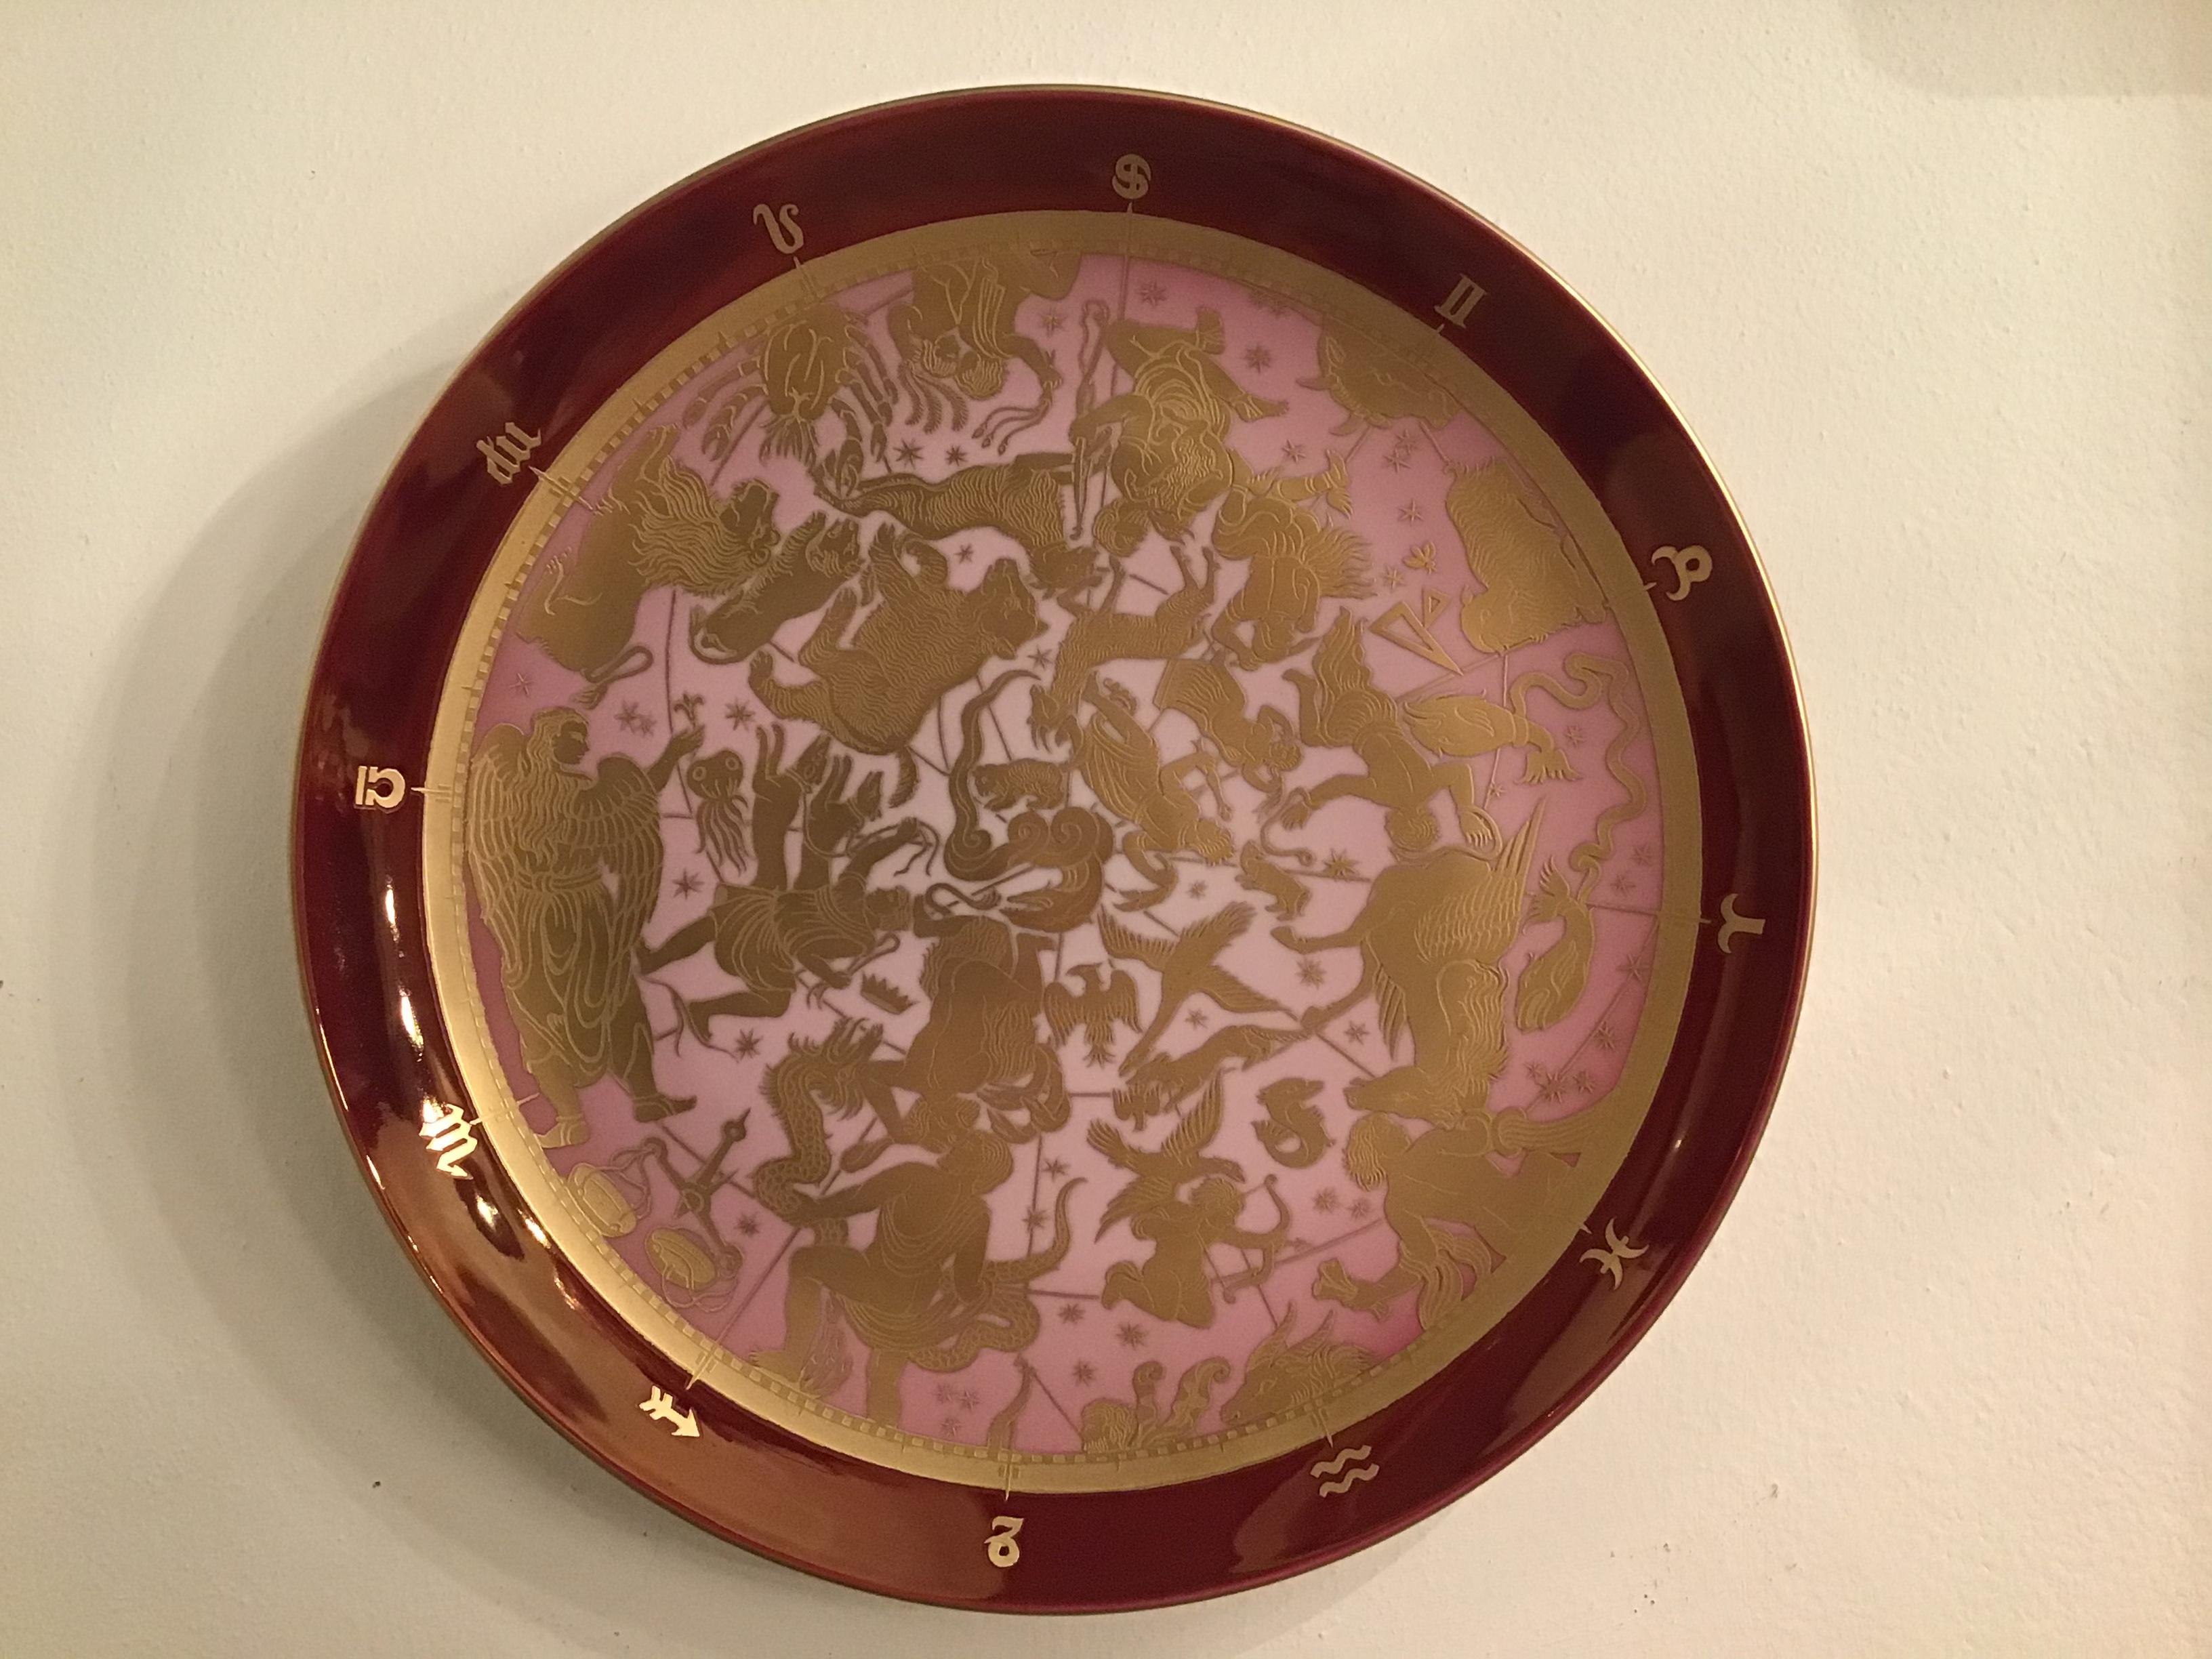 Morbelli porcelain wall plate “ planisfero Celeste “ worked with pure gold 1960 Italy.